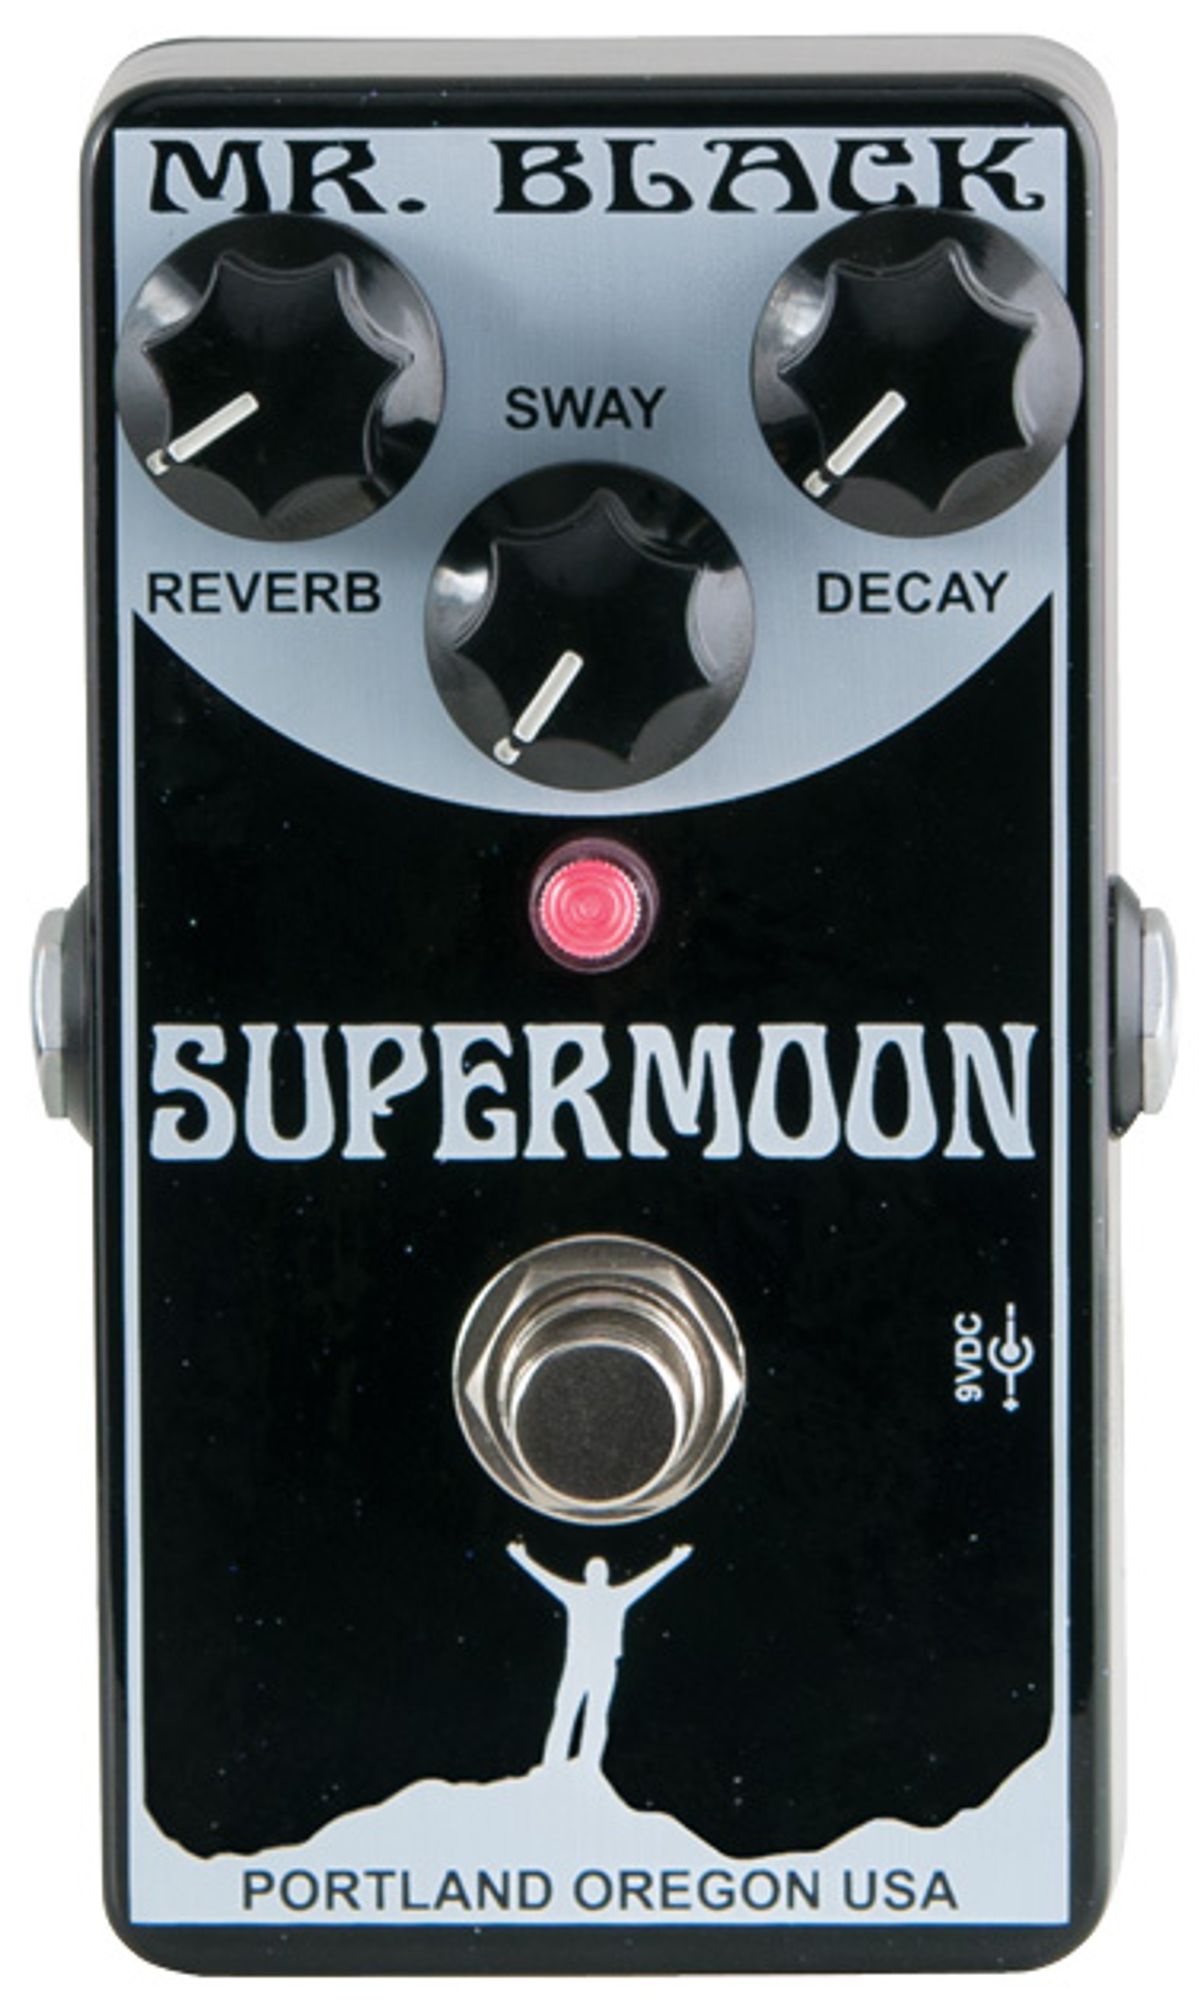 Mr. Black SuperMoon Reverb Review